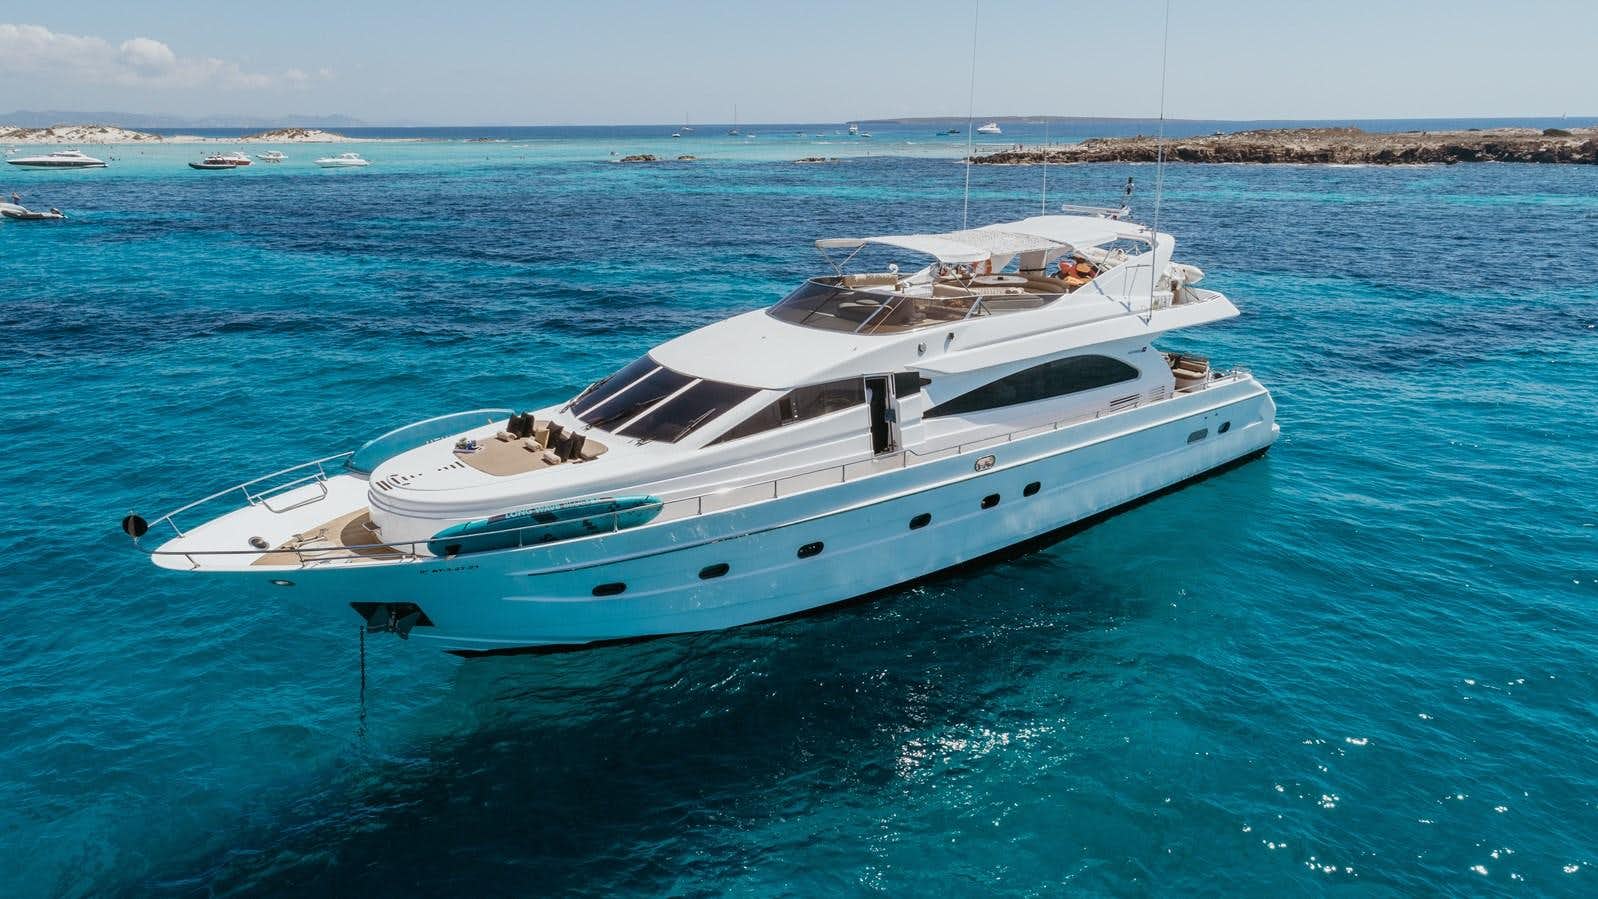 Nephenta
Yacht for Sale